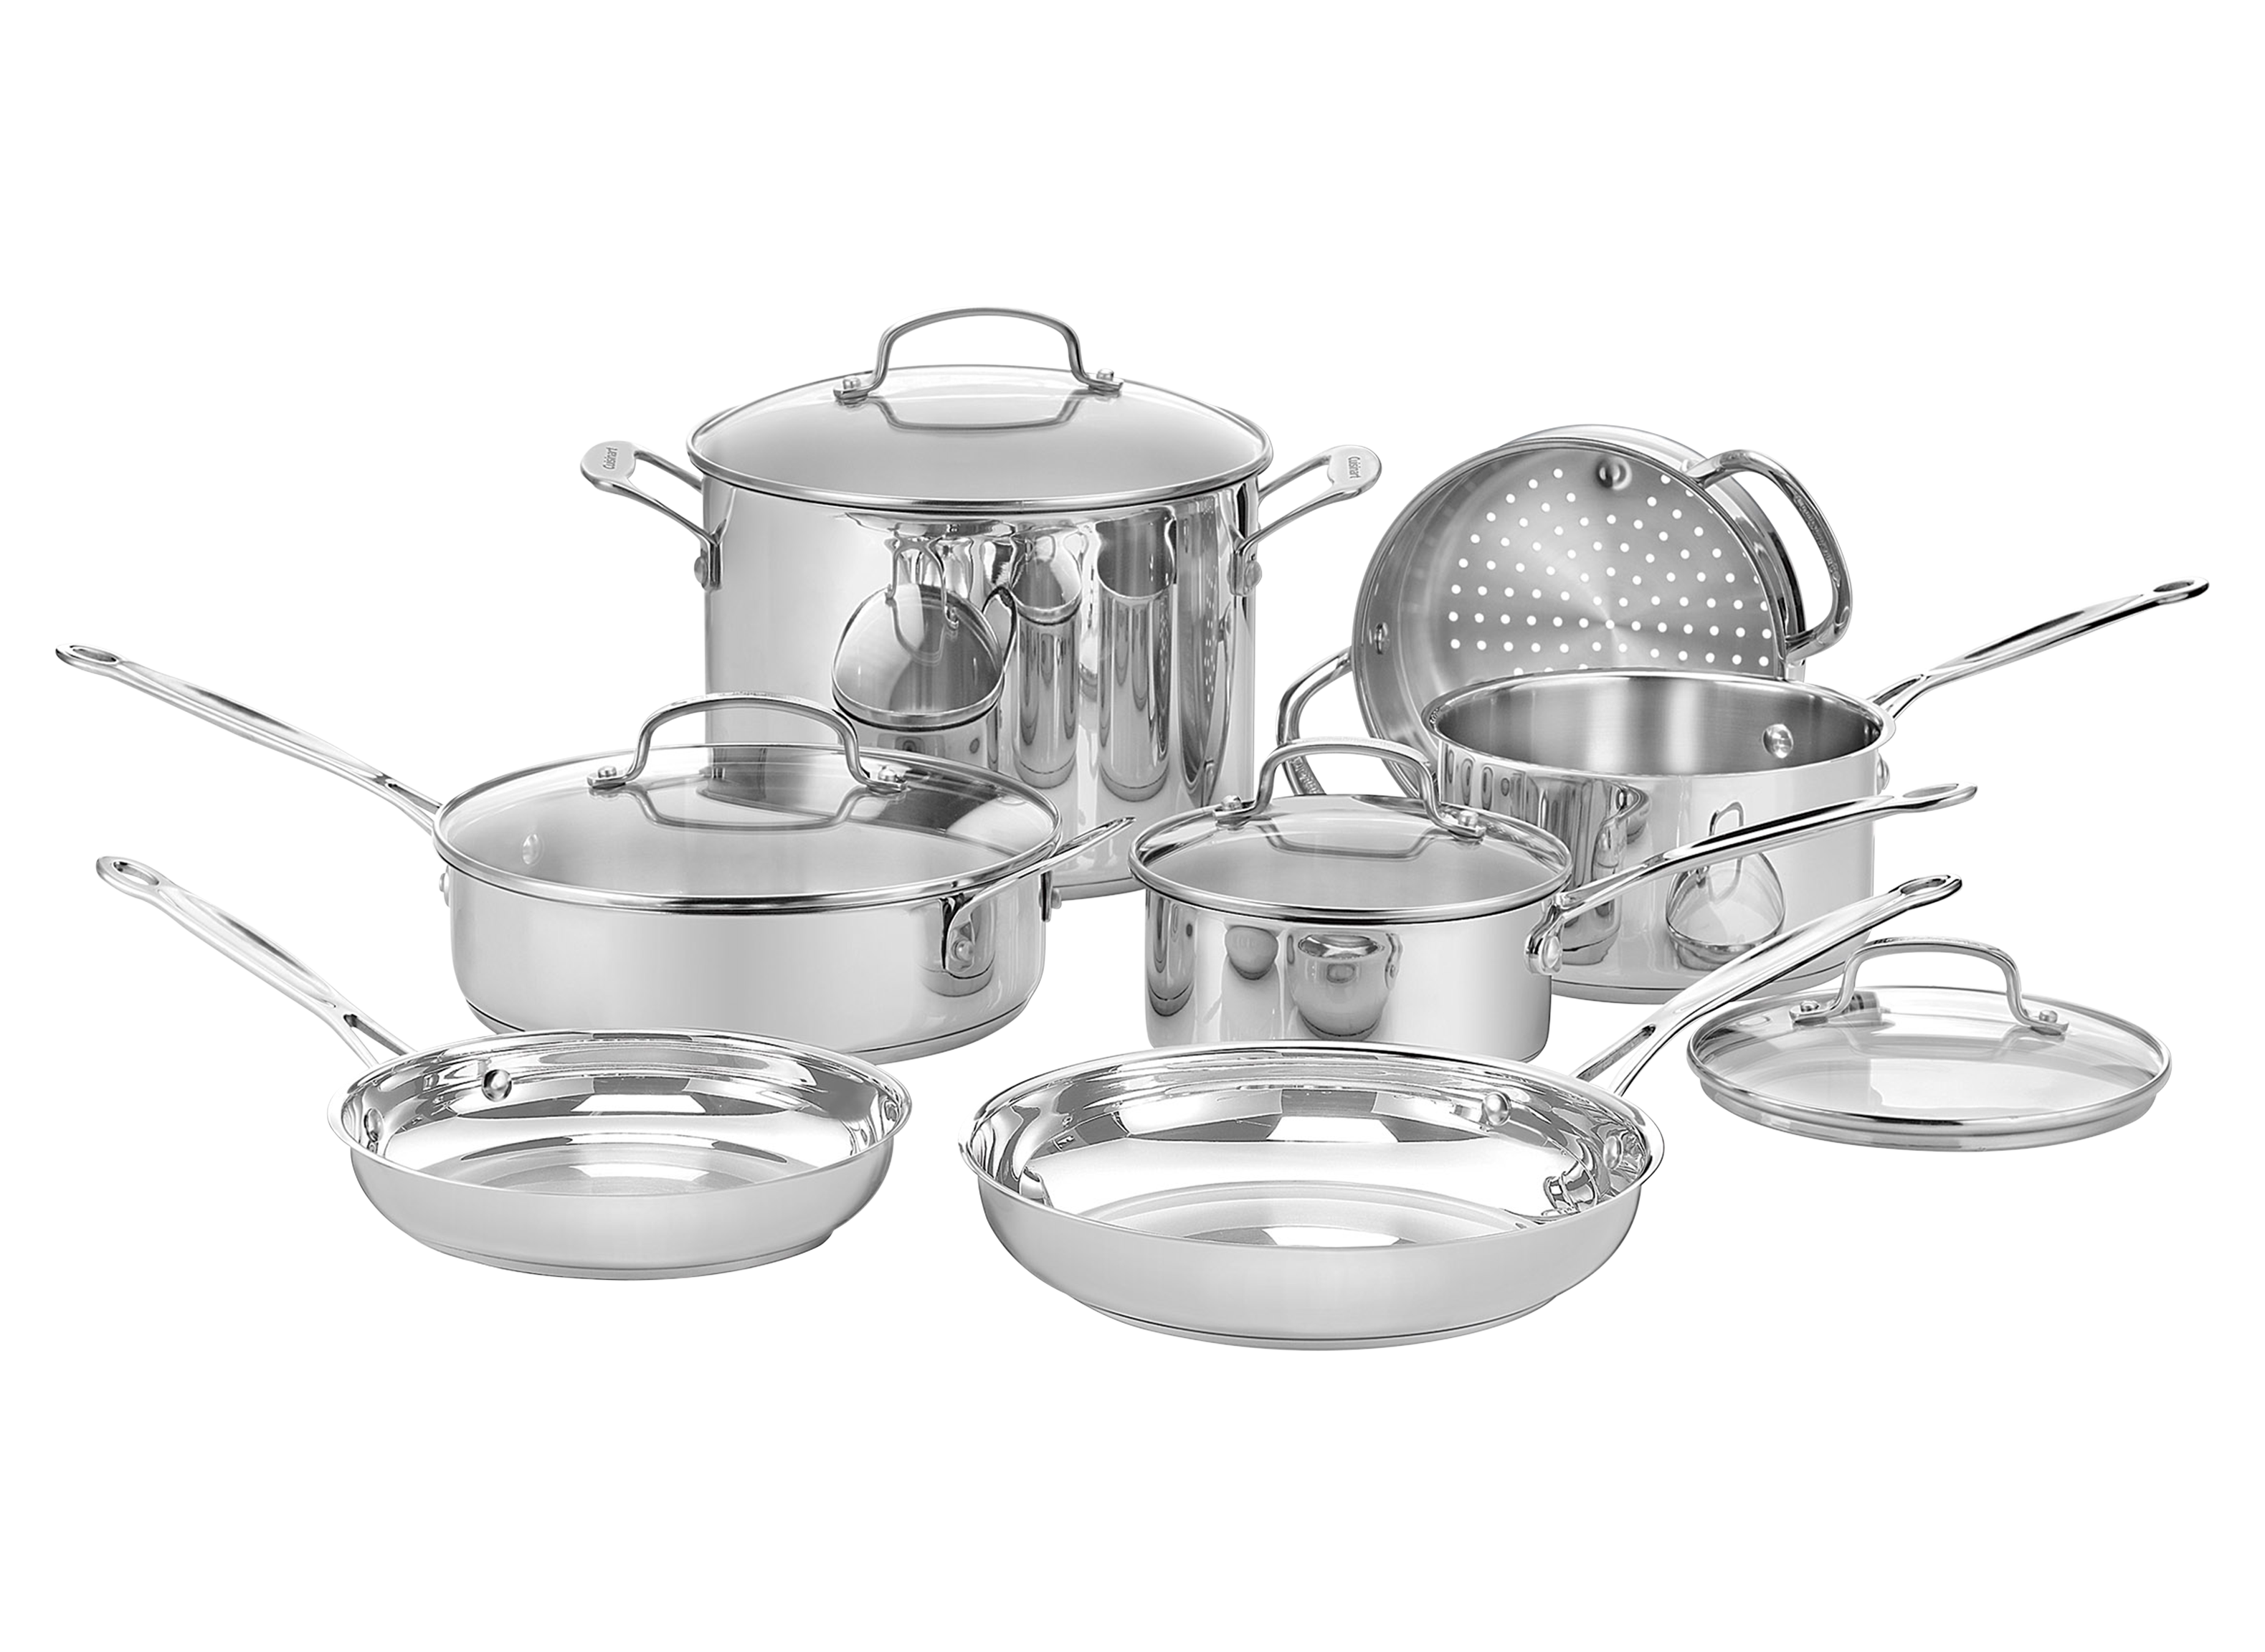 The Ultimate Cuisinart Cookware Review (Is It Any Good?) - Prudent Reviews